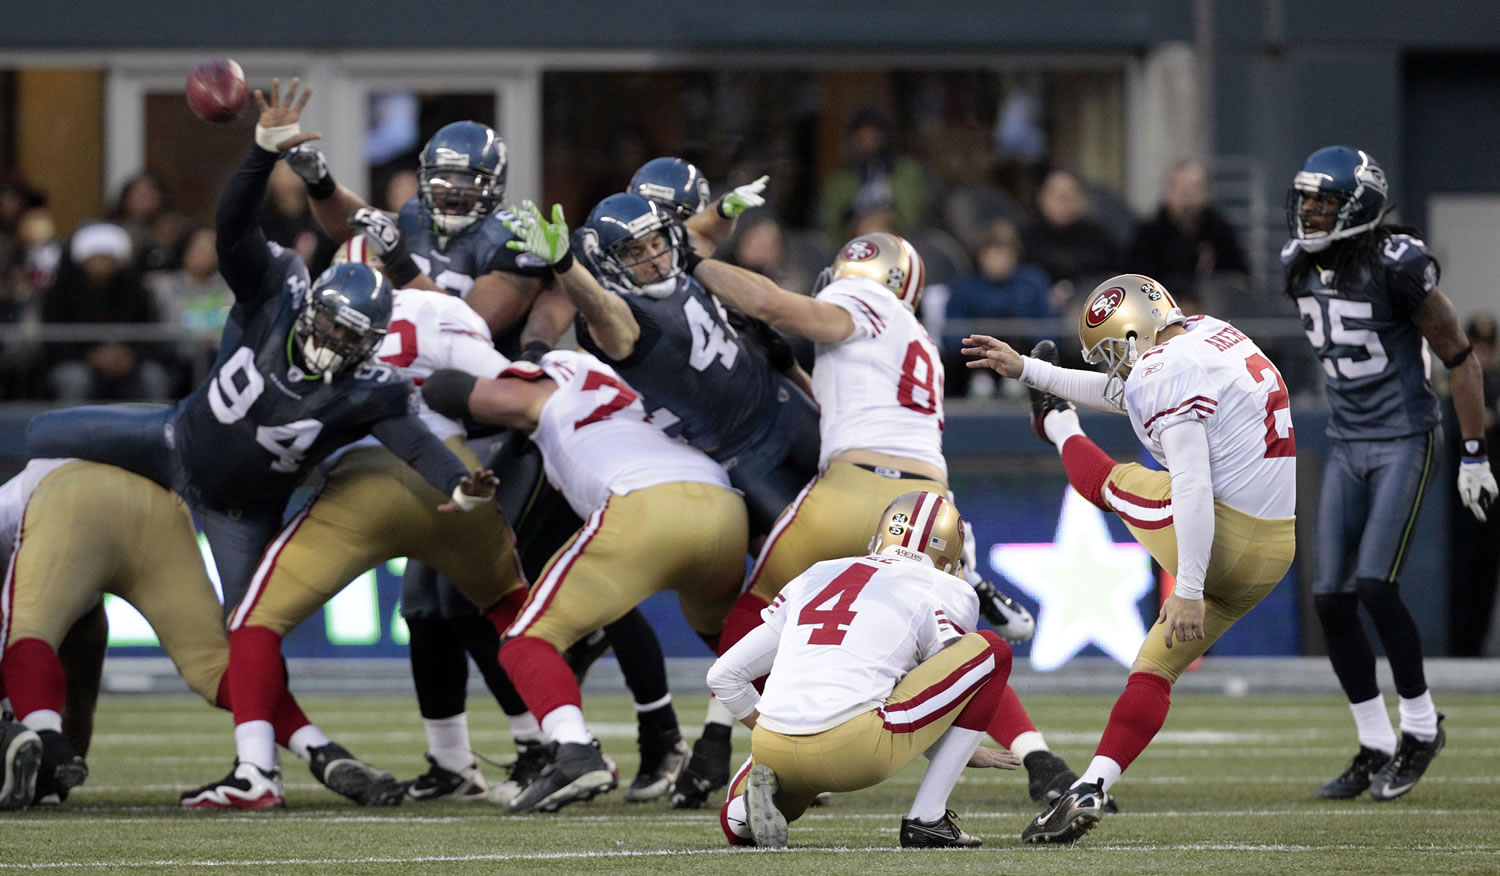 David Akers, right, kicks a 39-yard field goal, his fourth of the day, sending the San Francisco 49ers to a 19-17 win over the Seahawks.